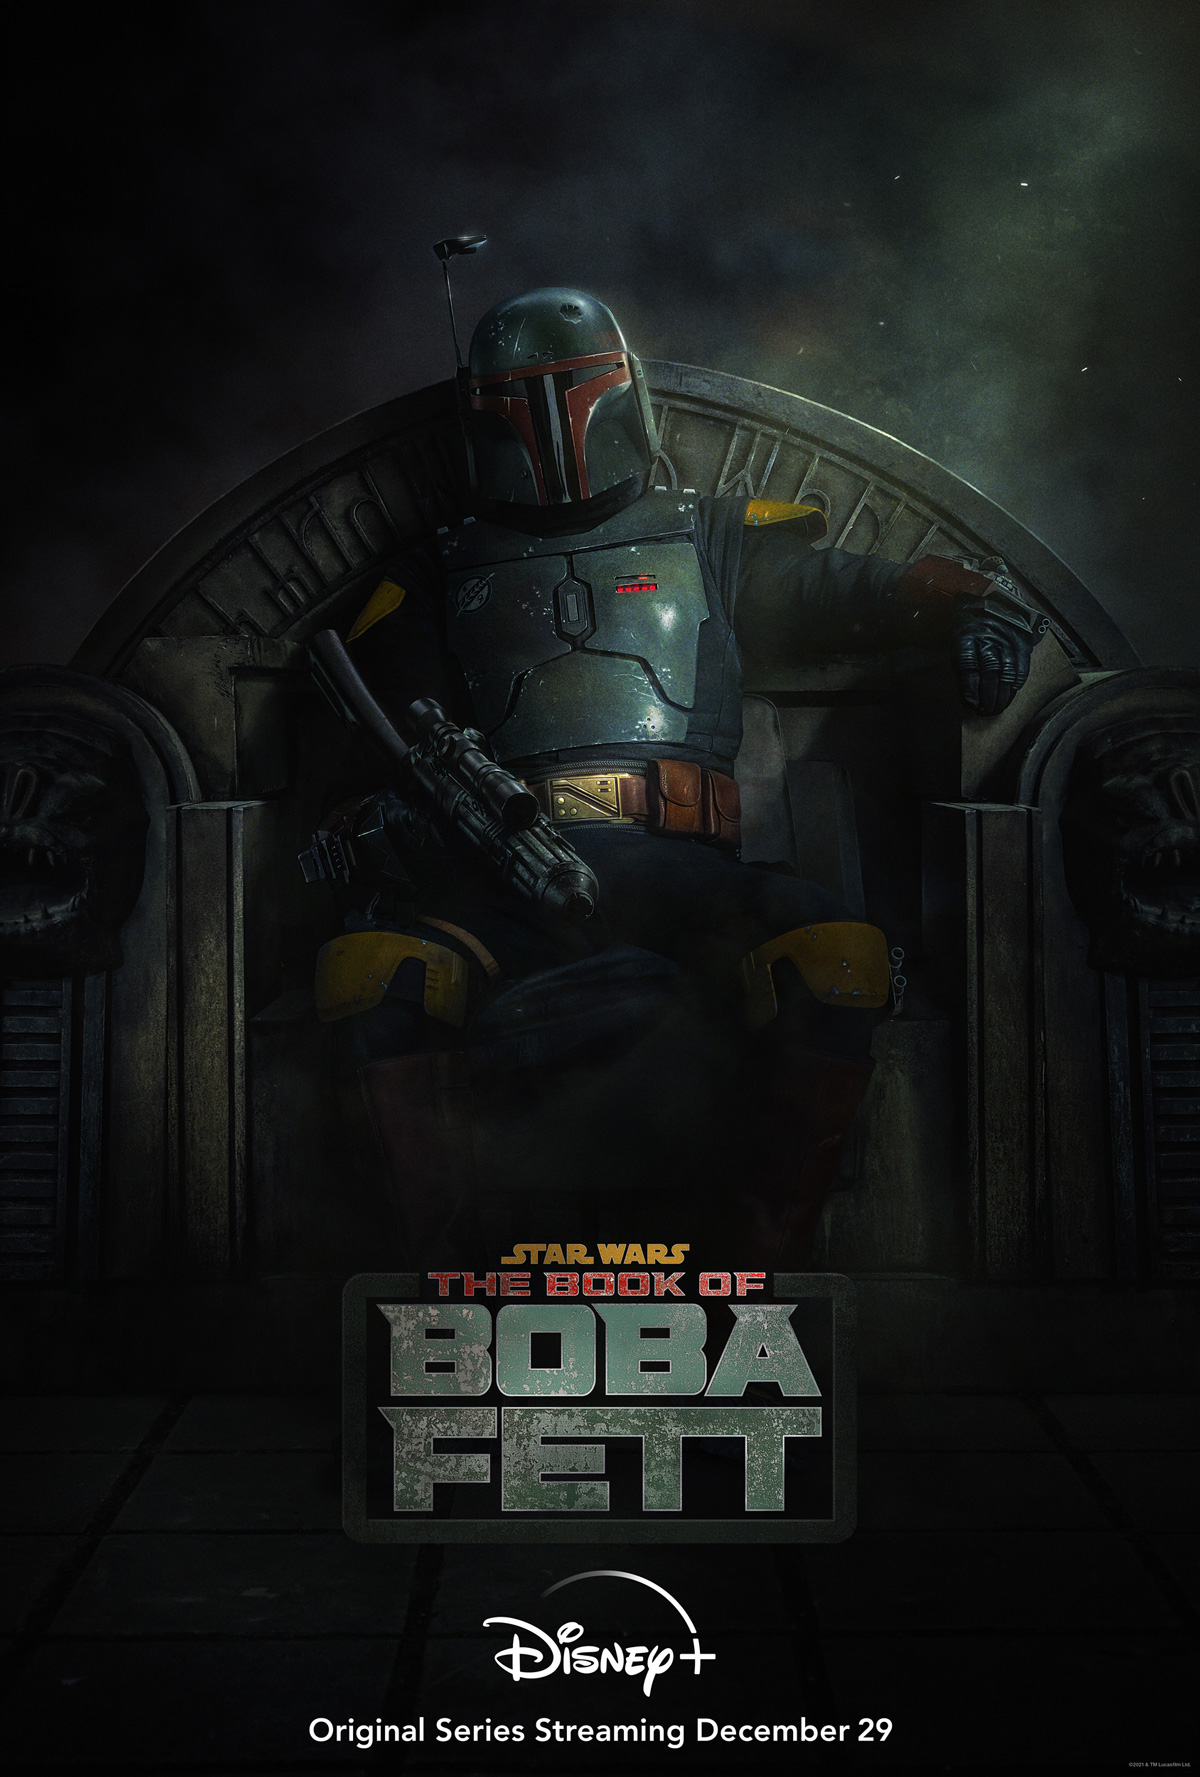 Book of Boba release date Poster